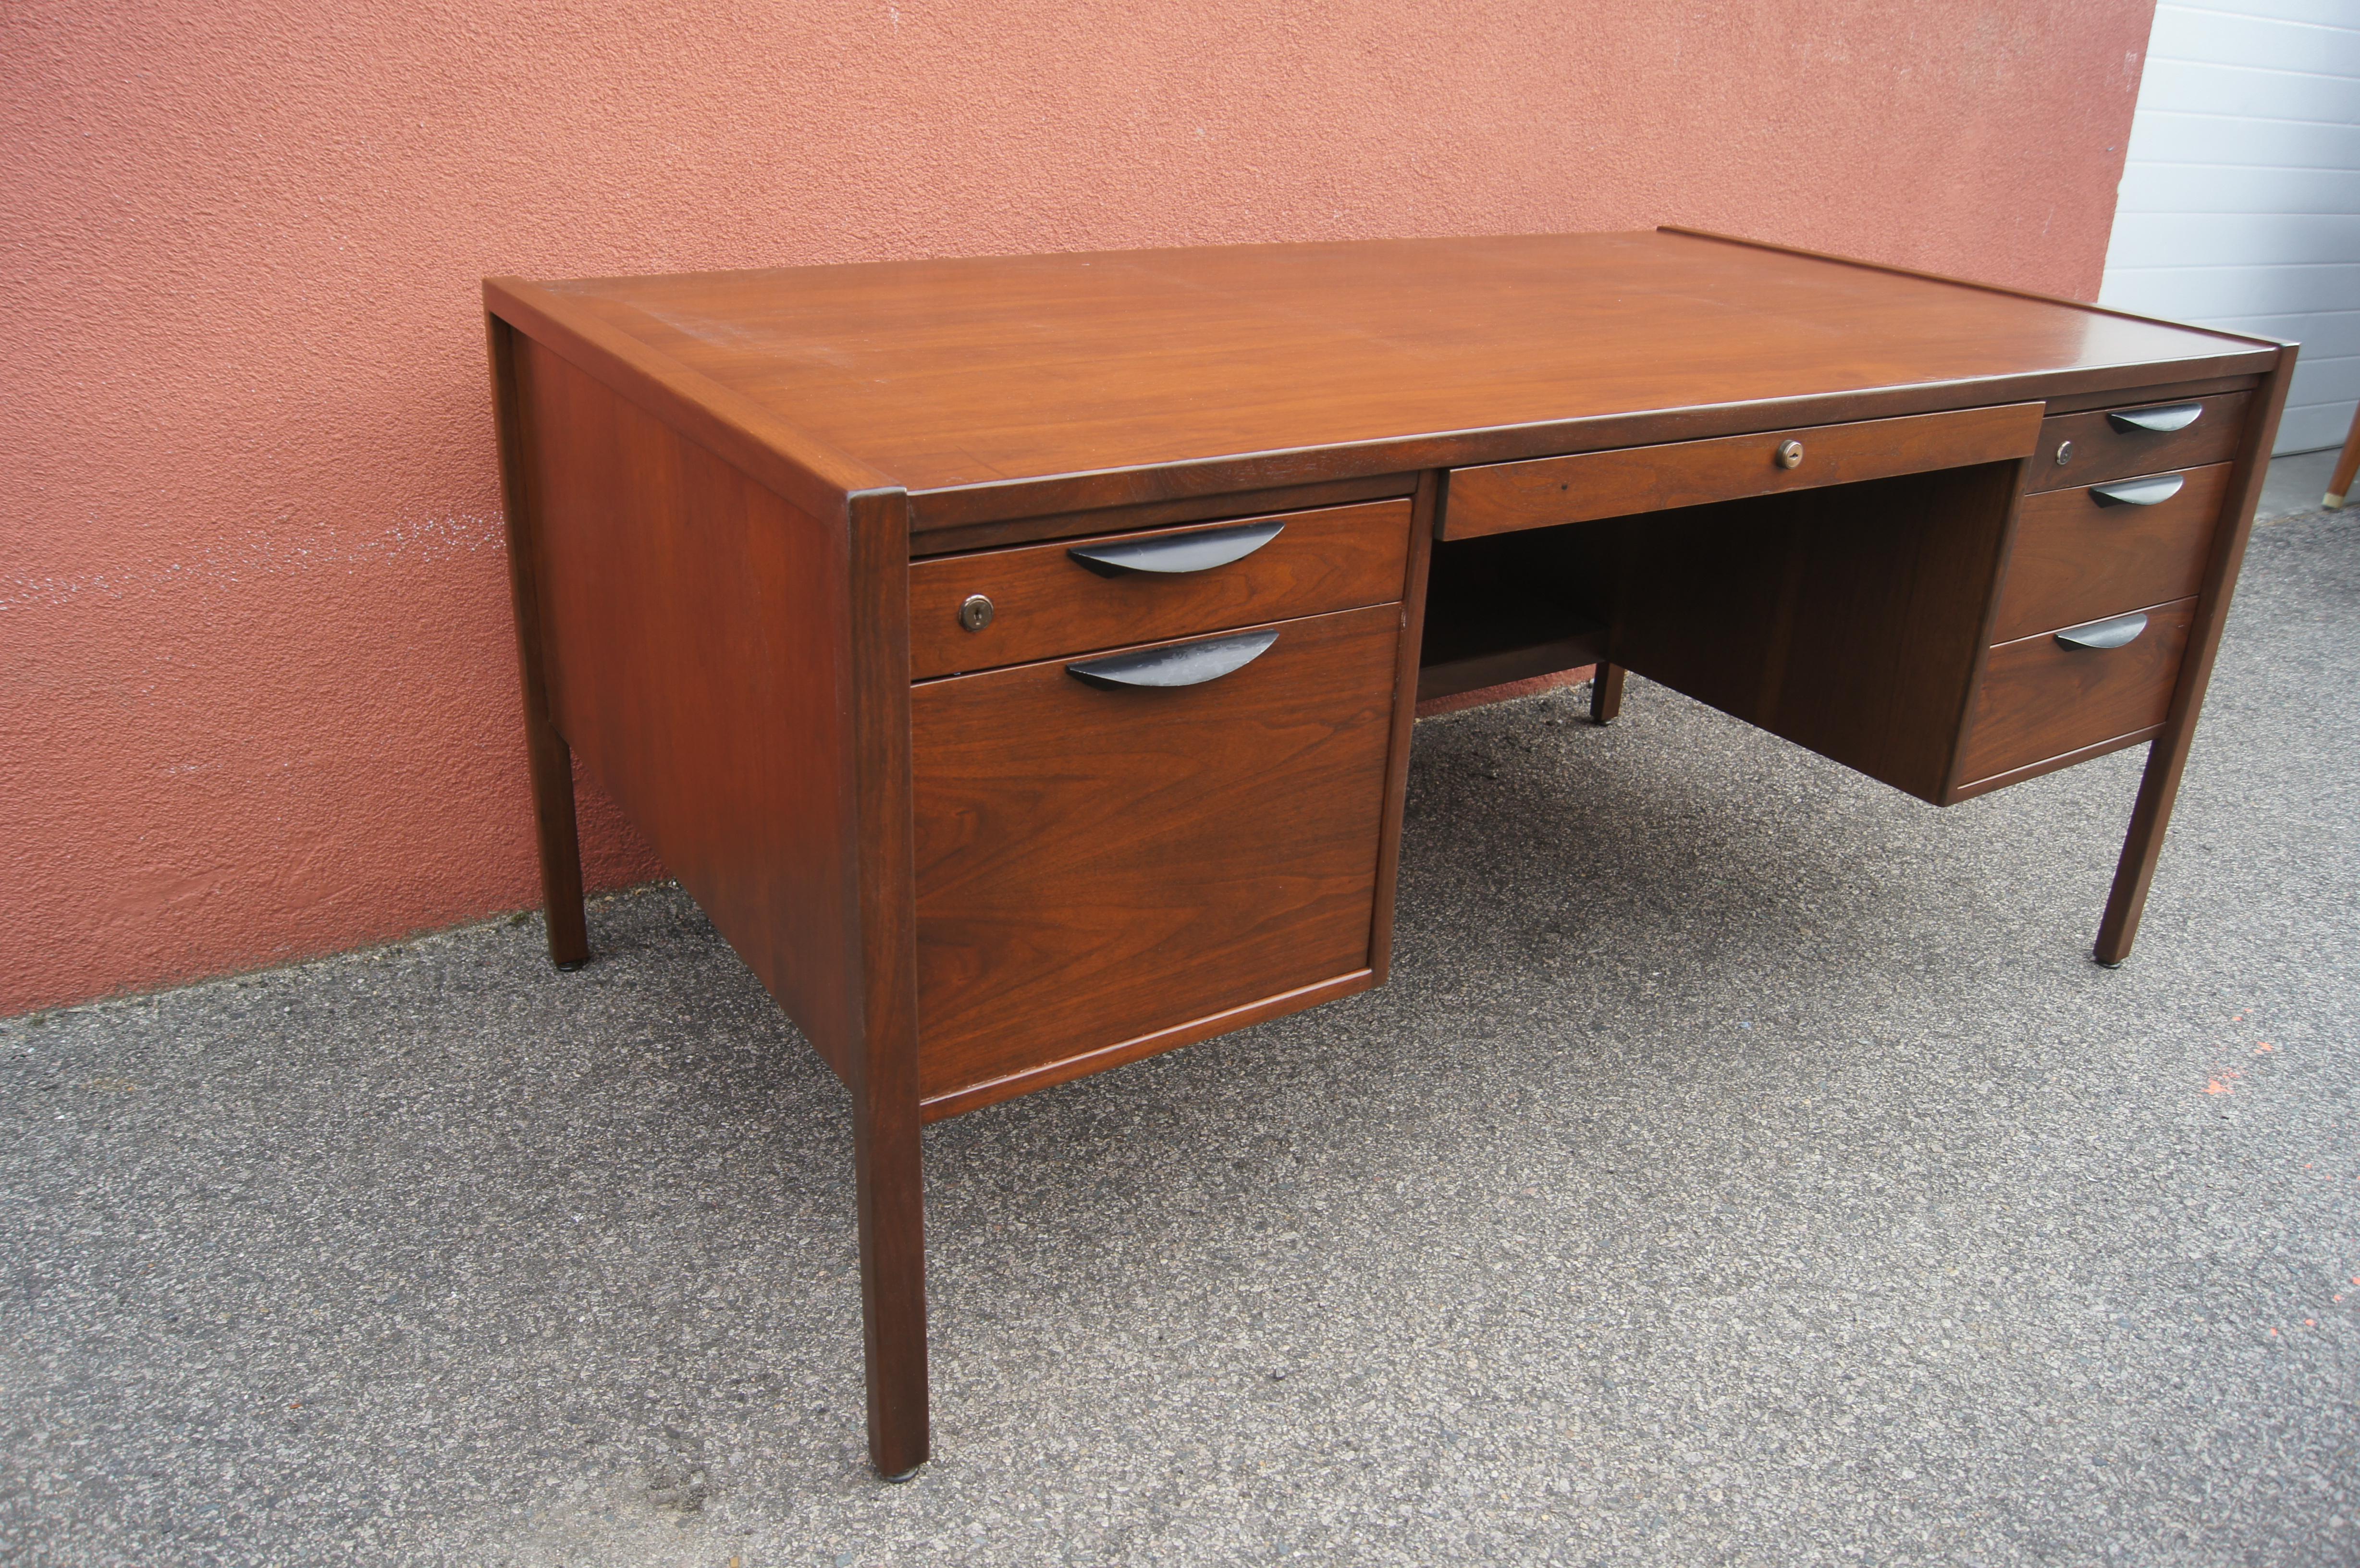 This executive desk, designed by Jens Risom in the 1960s, comprises a handsome walnut case that has been finished on all sides. Deep drawers with metal demilune pulls — two on the left, three on the right — offer substantial storage. A shallow